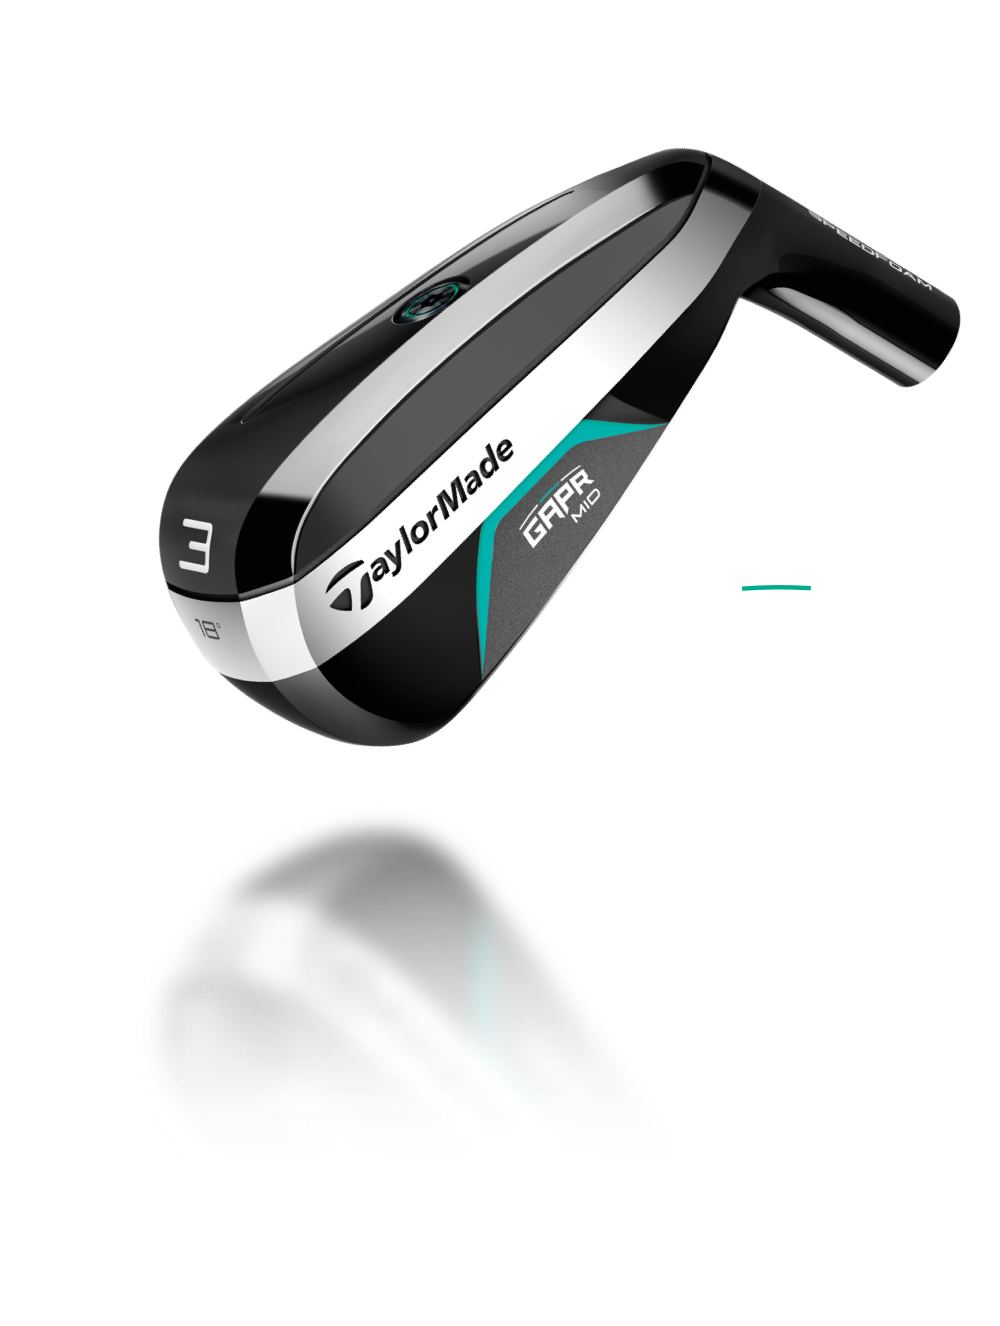 Bridge the Gap in Your Long Game with GAPR | TaylorMade Golf